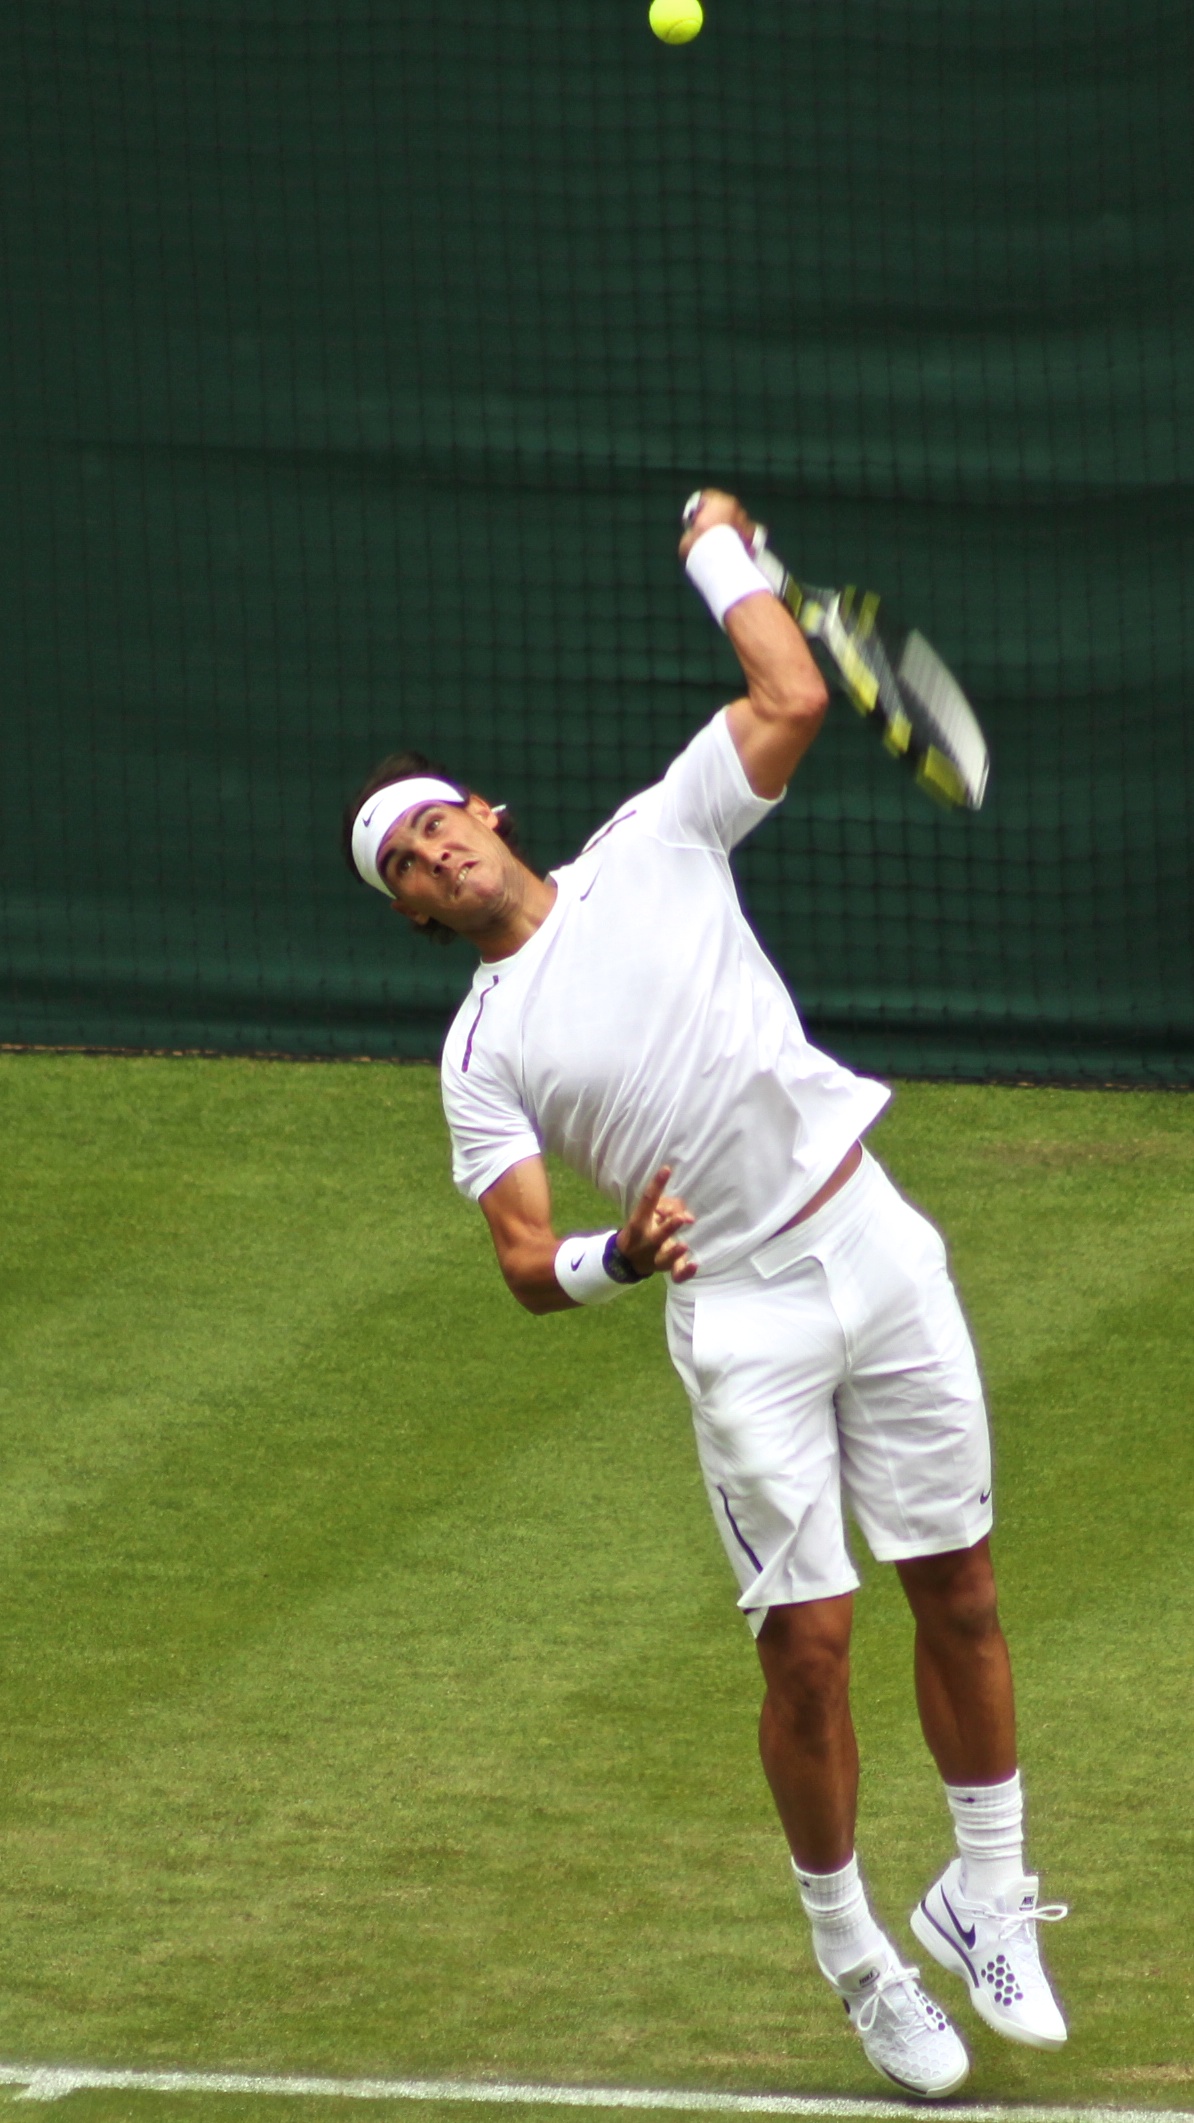 a tennis player who is hitting a ball with his racket